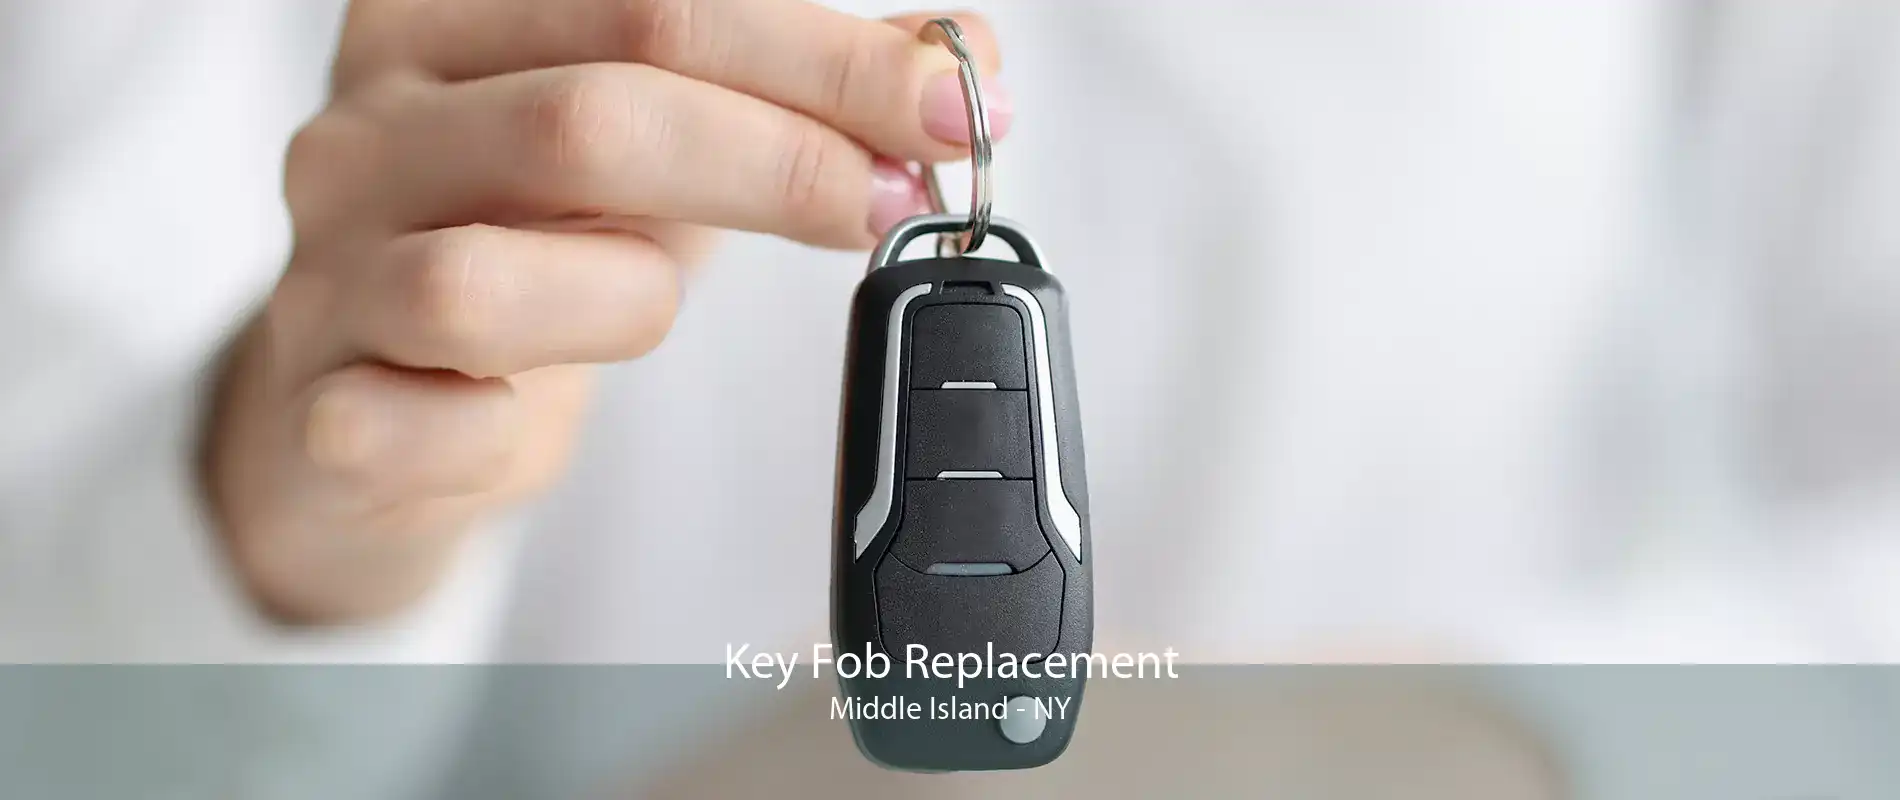 Key Fob Replacement Middle Island - NY